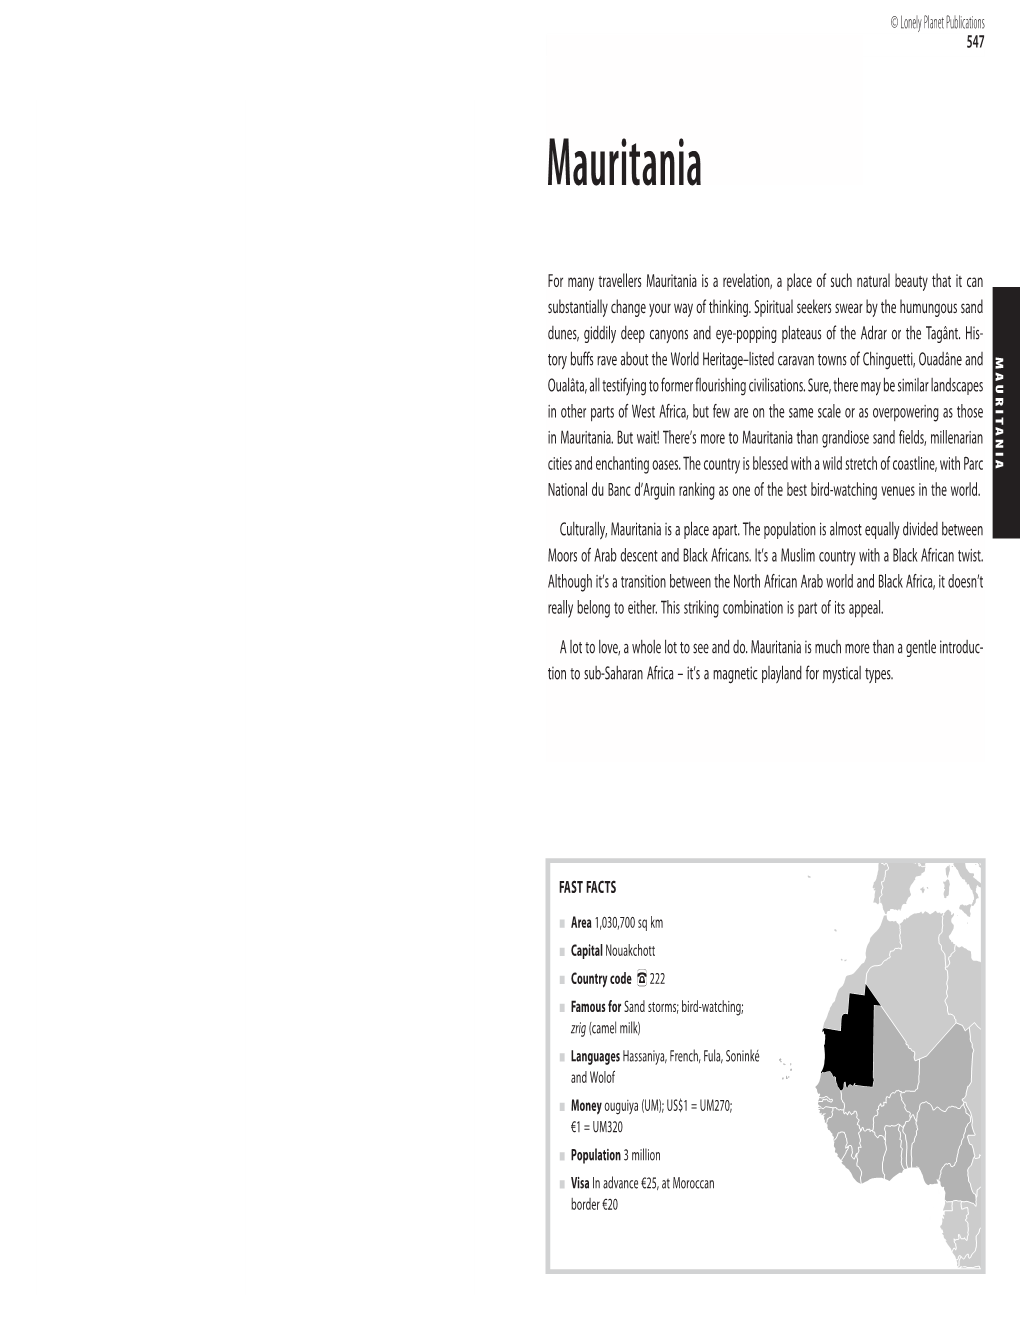 MAURITANIA 547 © Lonely Planet Publications 222 %